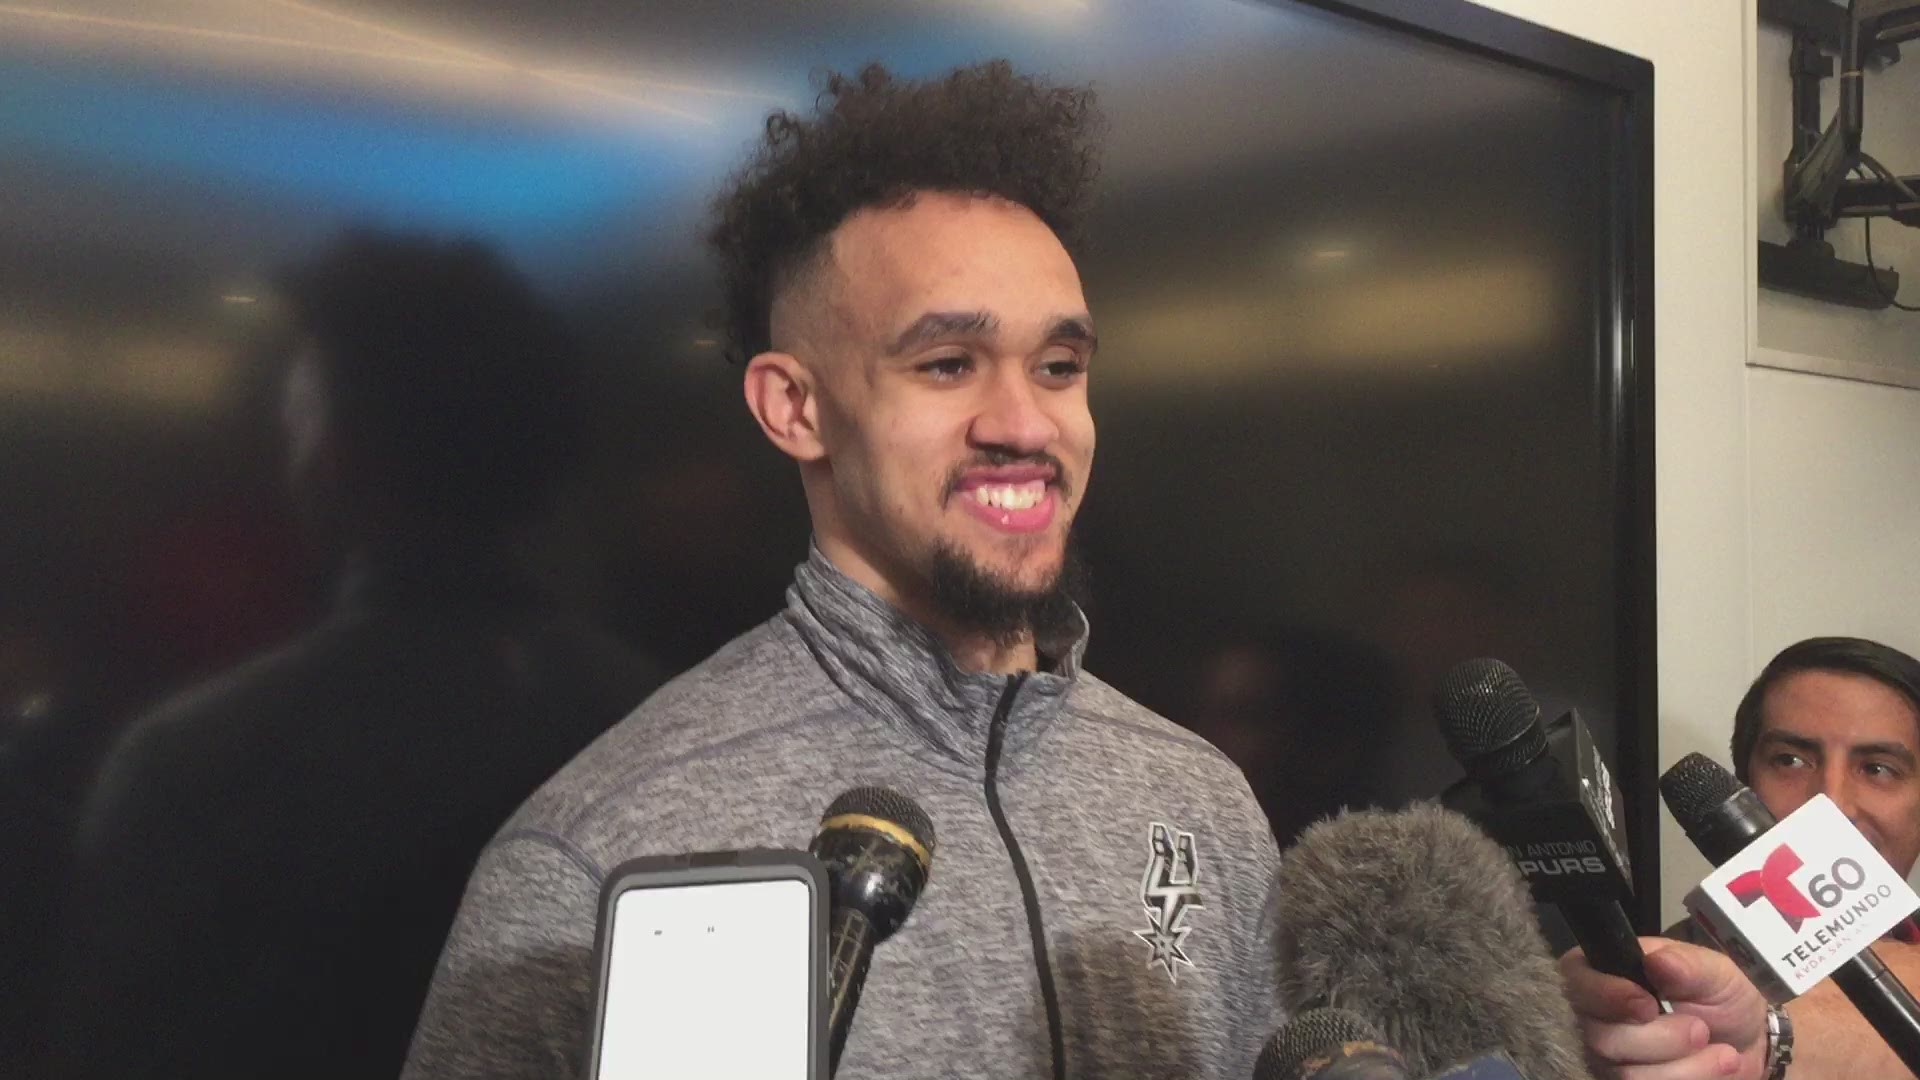 Spurs point guard Derrick White on the win over the Raptors